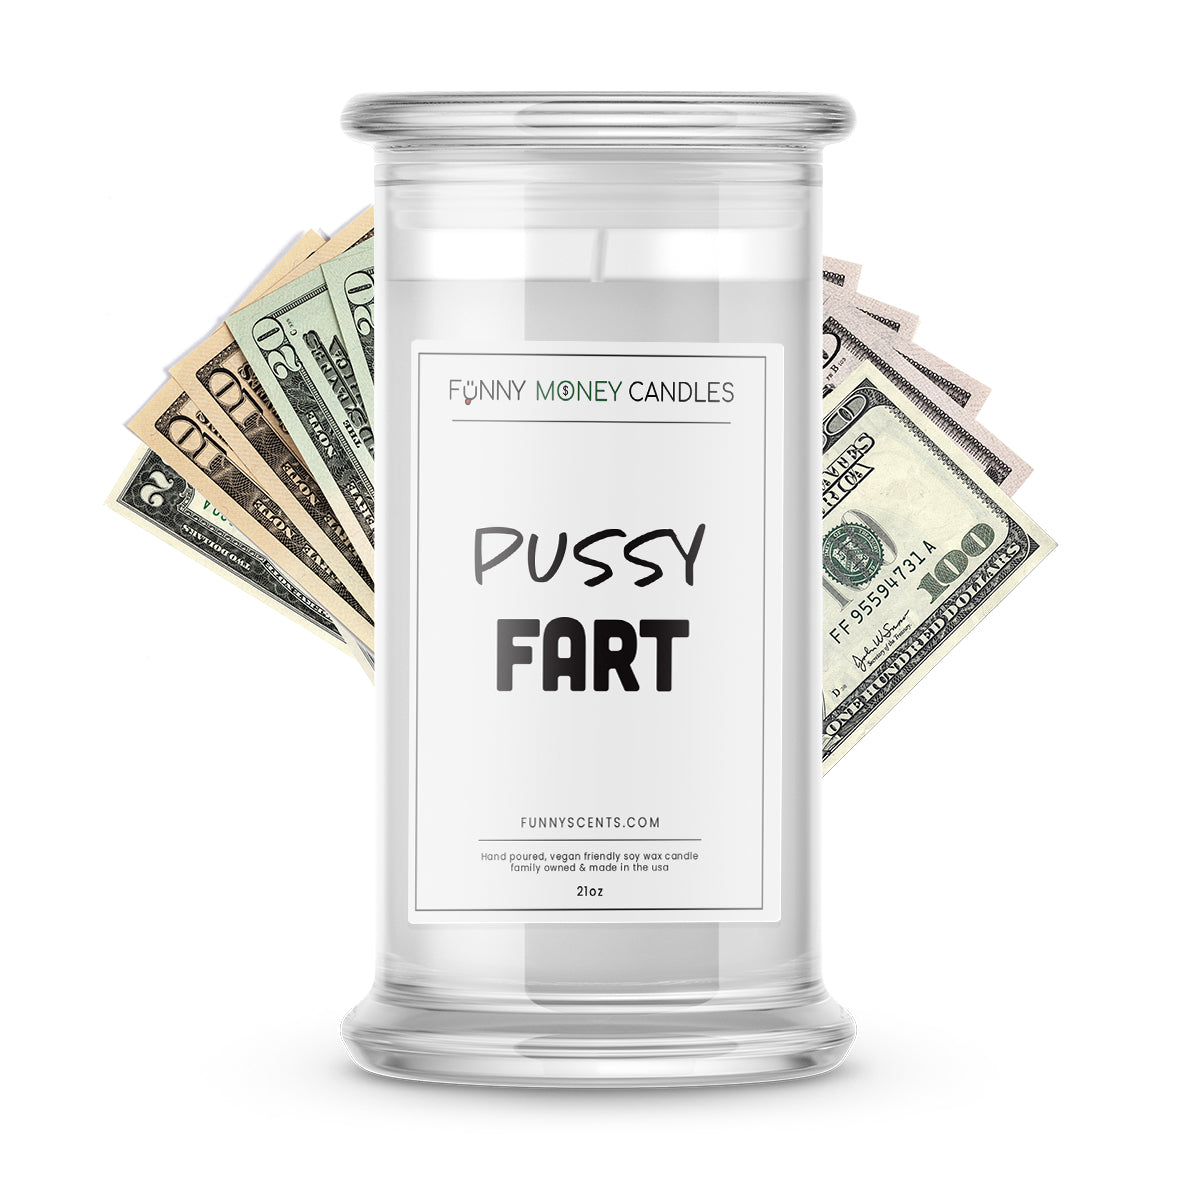 What Is Pussy Fart